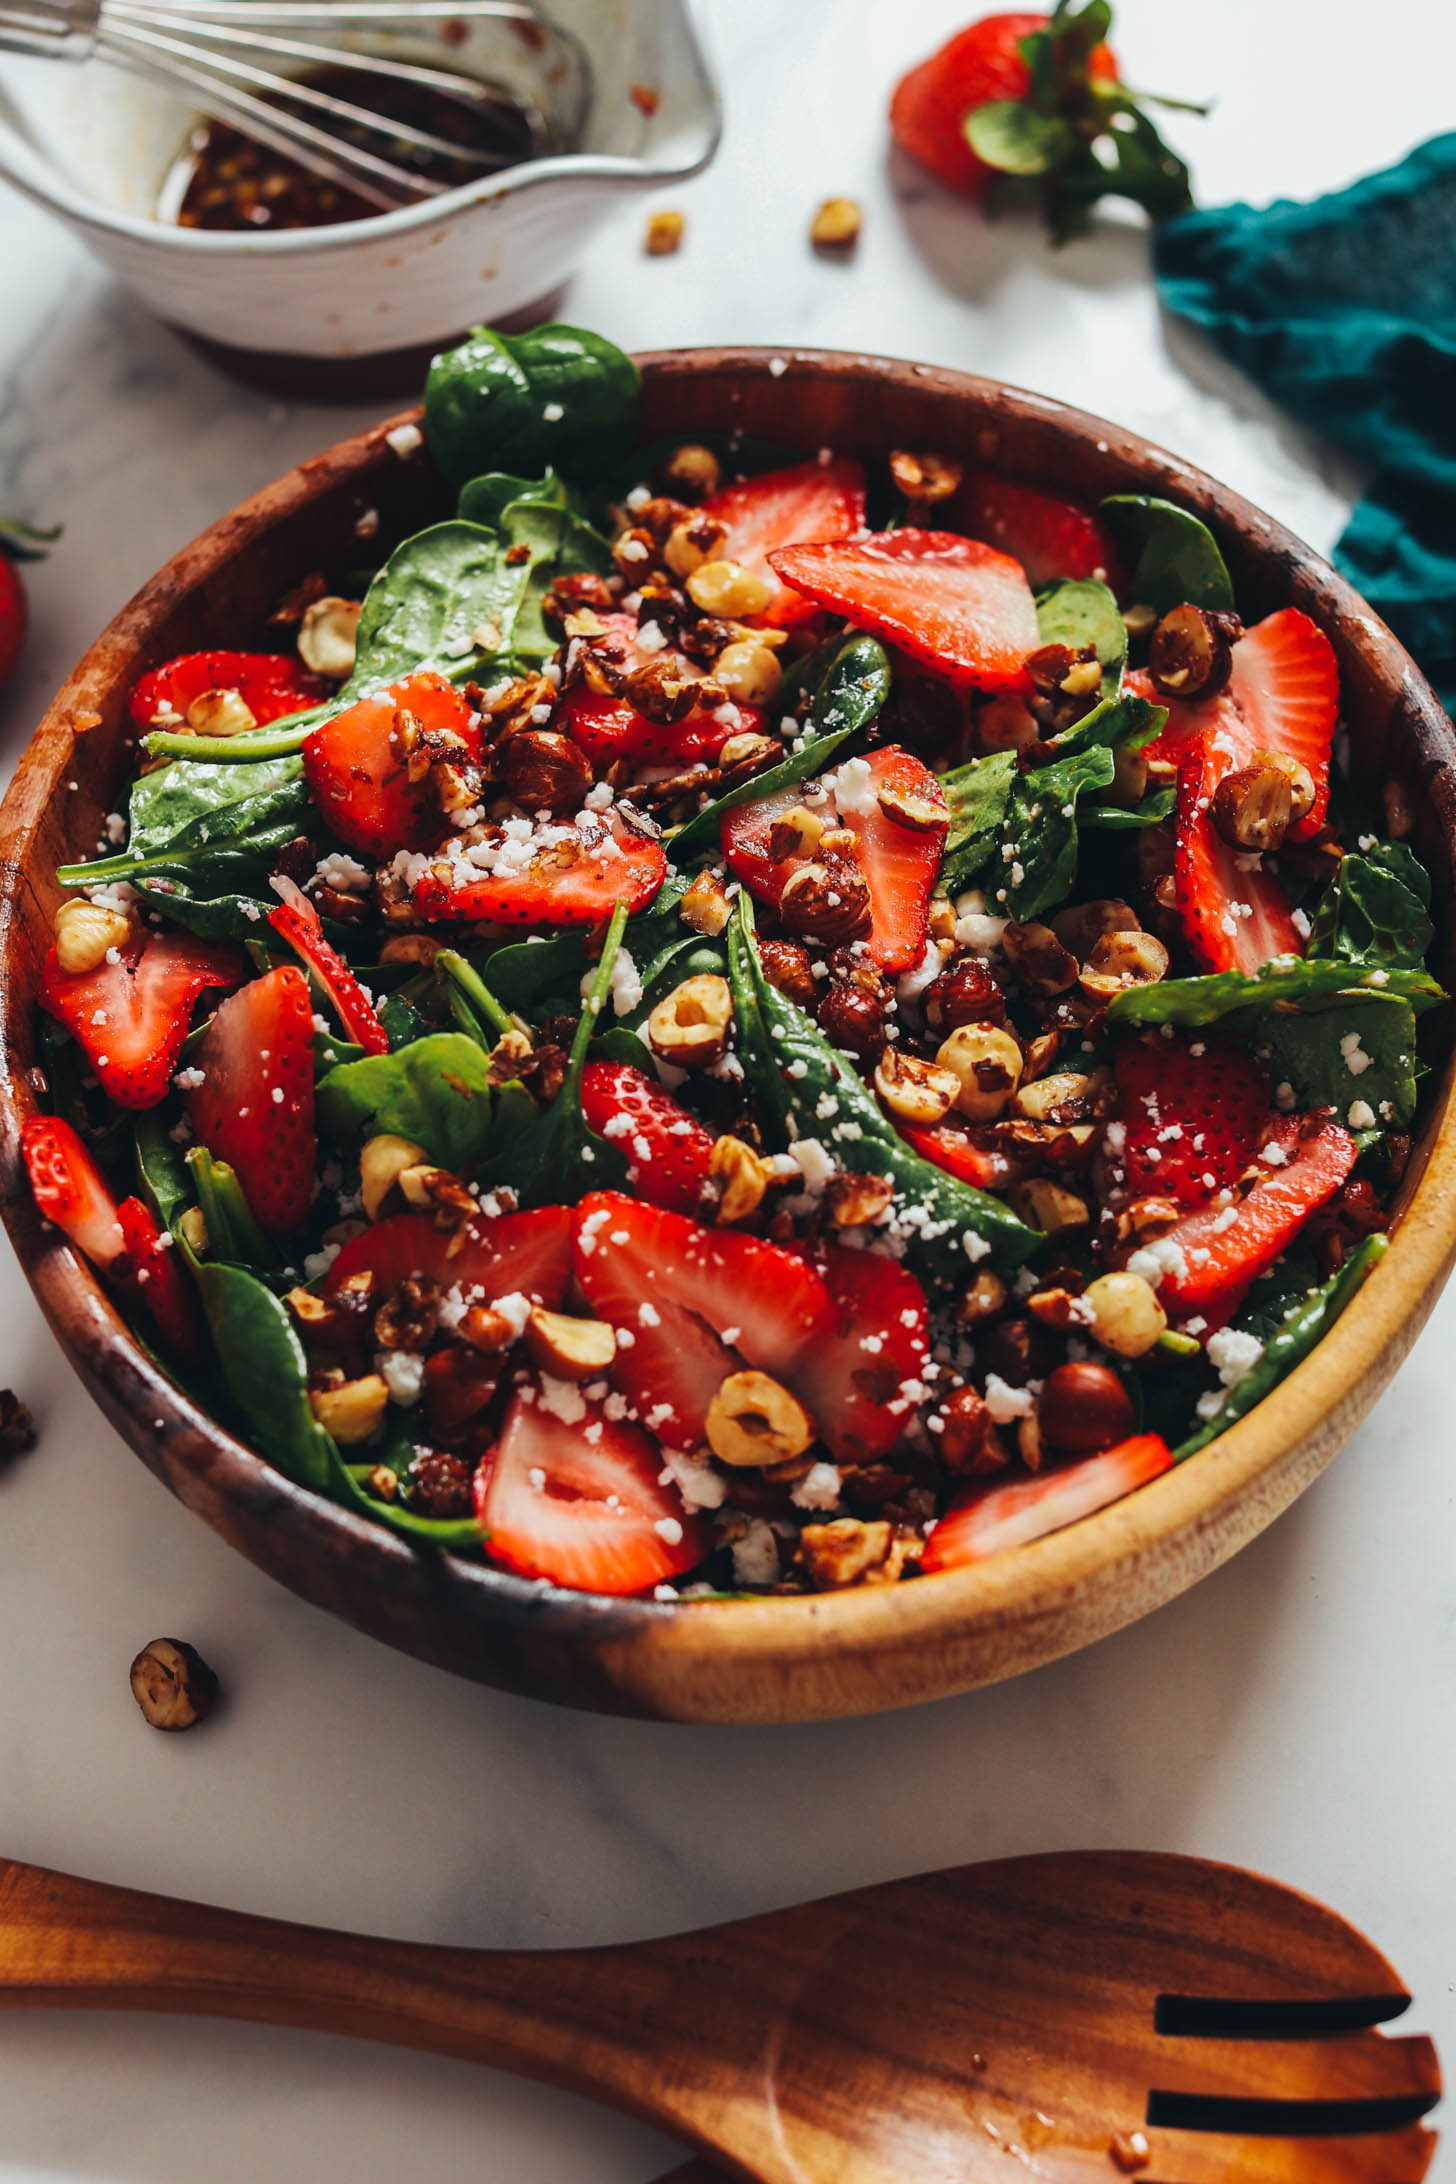 Angled shot of a wood serving bowl filled with strawberry spinach salad